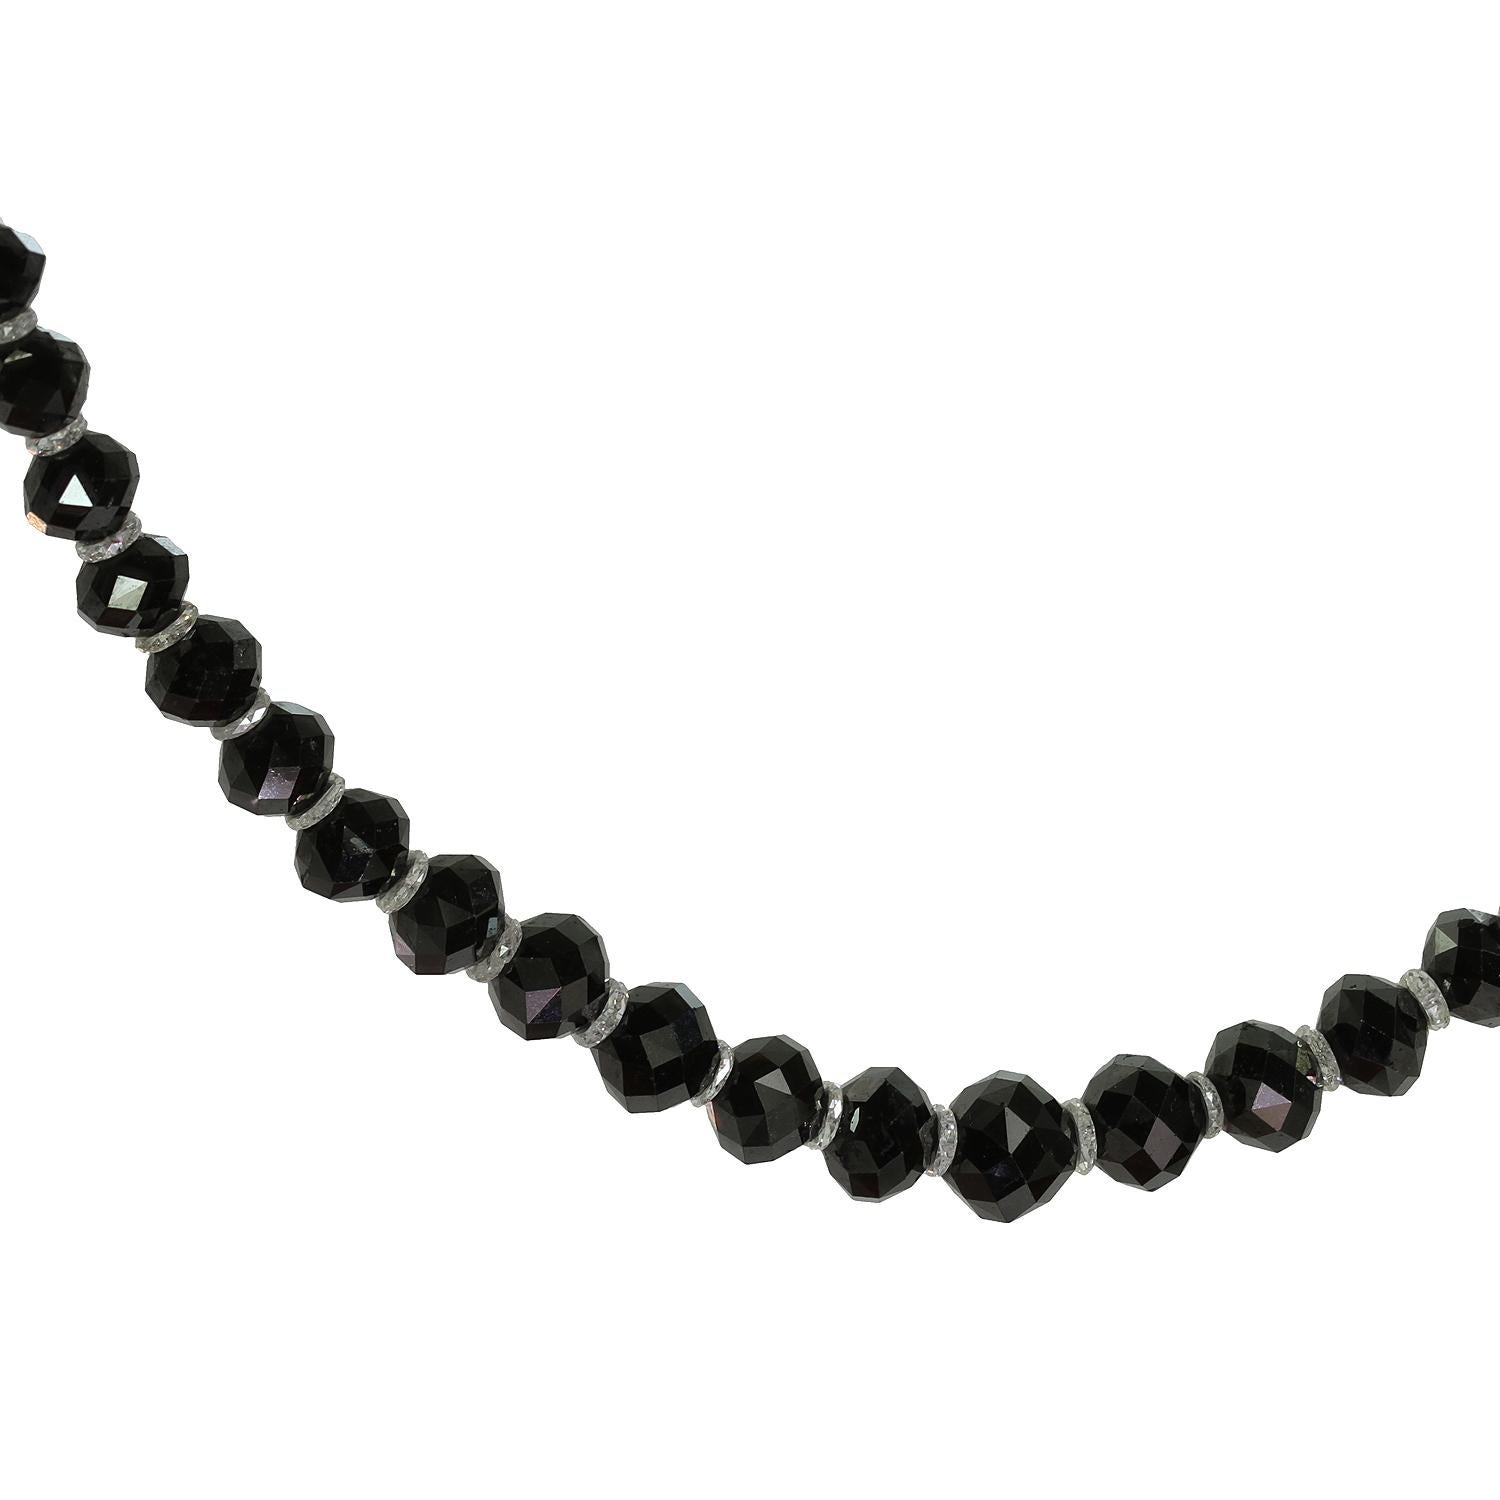 This exquisite necklace features a single strand of sparkling black diamond faceted beads each spaced by rare white briolette-cut diamonds roundels measuring between 4.40mm and 7.40mm. The necklace is completed with a antique CARTIER platinum clasp